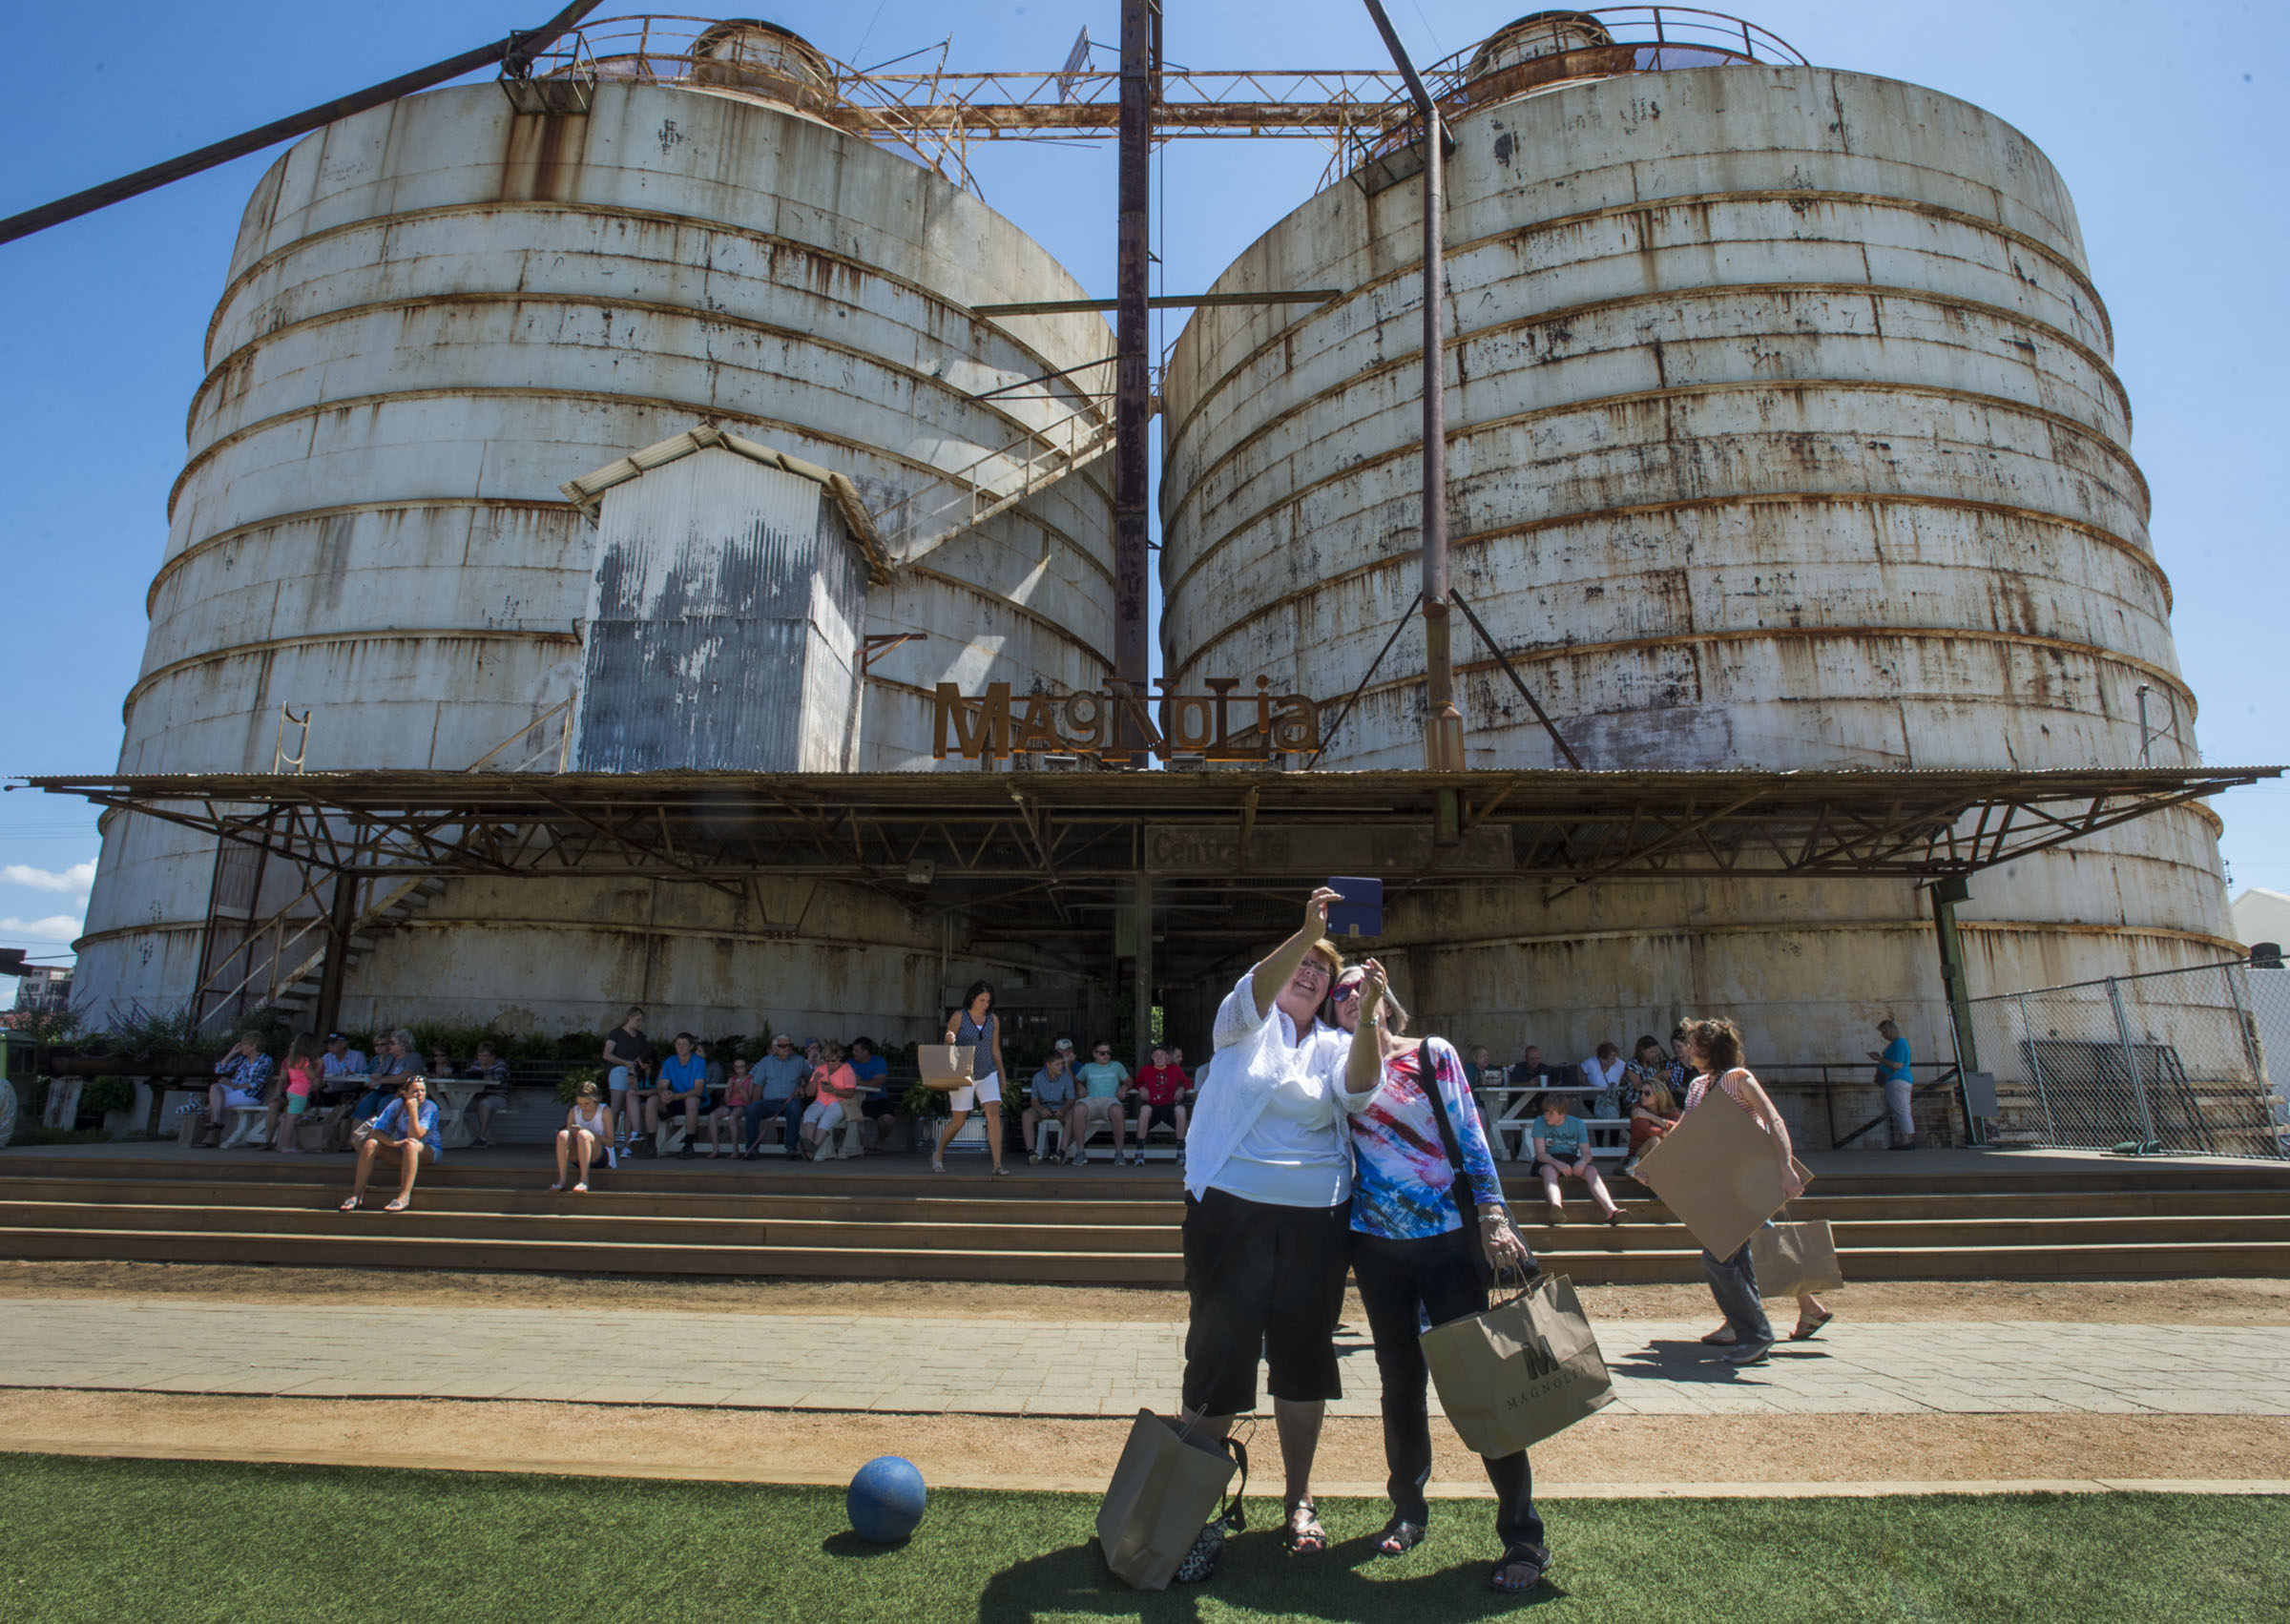 Two people take a selfie in front of large metal grain silos